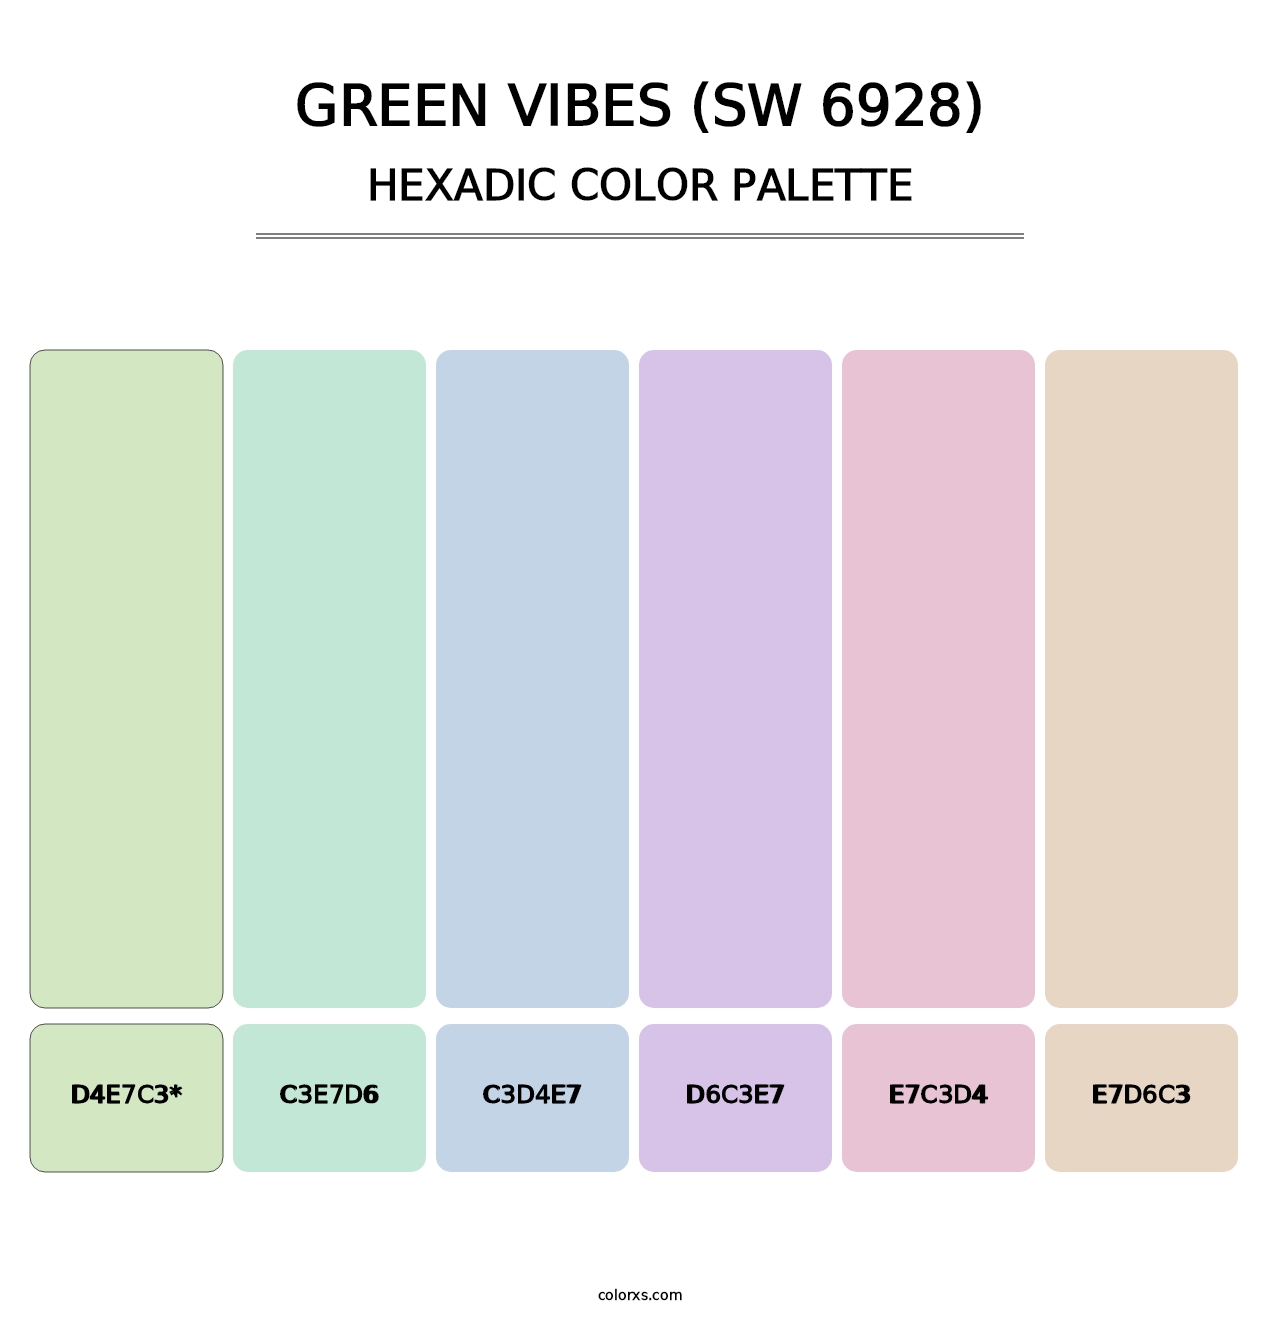 Green Vibes (SW 6928) - Hexadic Color Palette